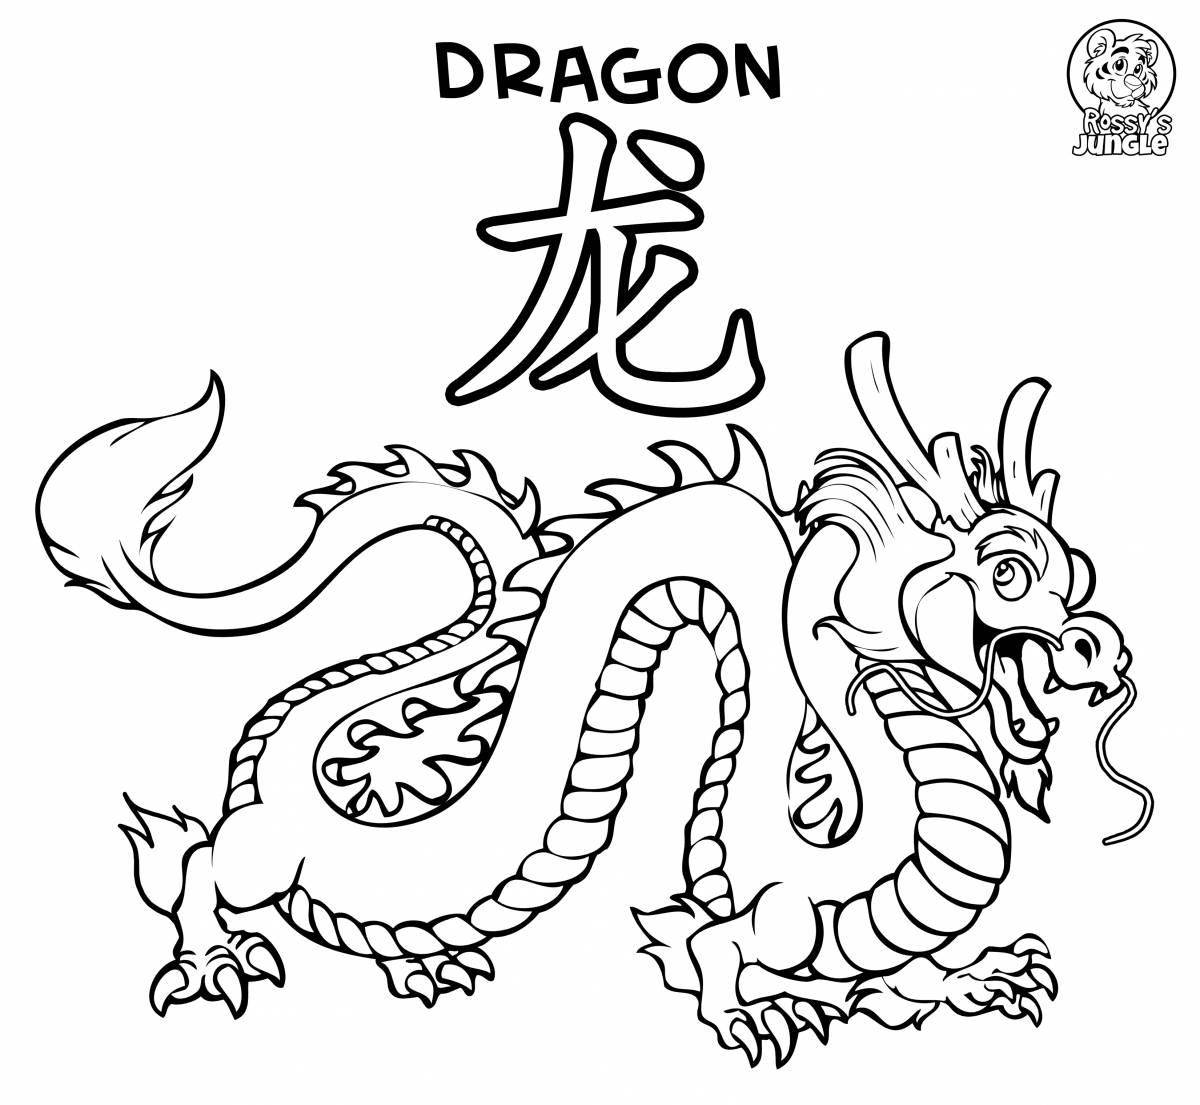 Gorgeous Chinese dragon coloring book